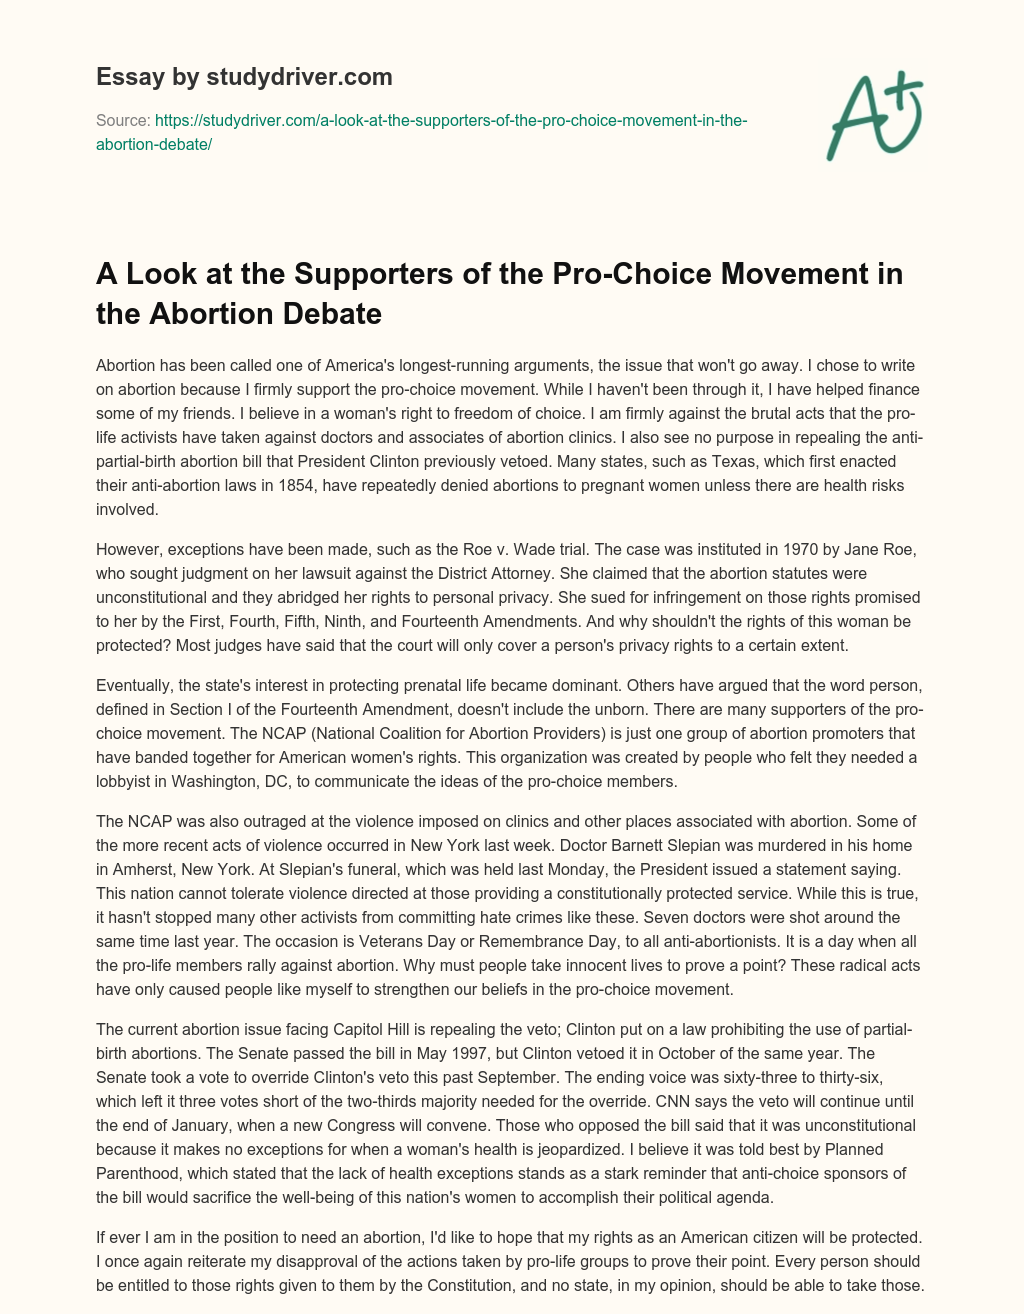 A Look at the Supporters of the Pro-Choice Movement in the Abortion Debate essay